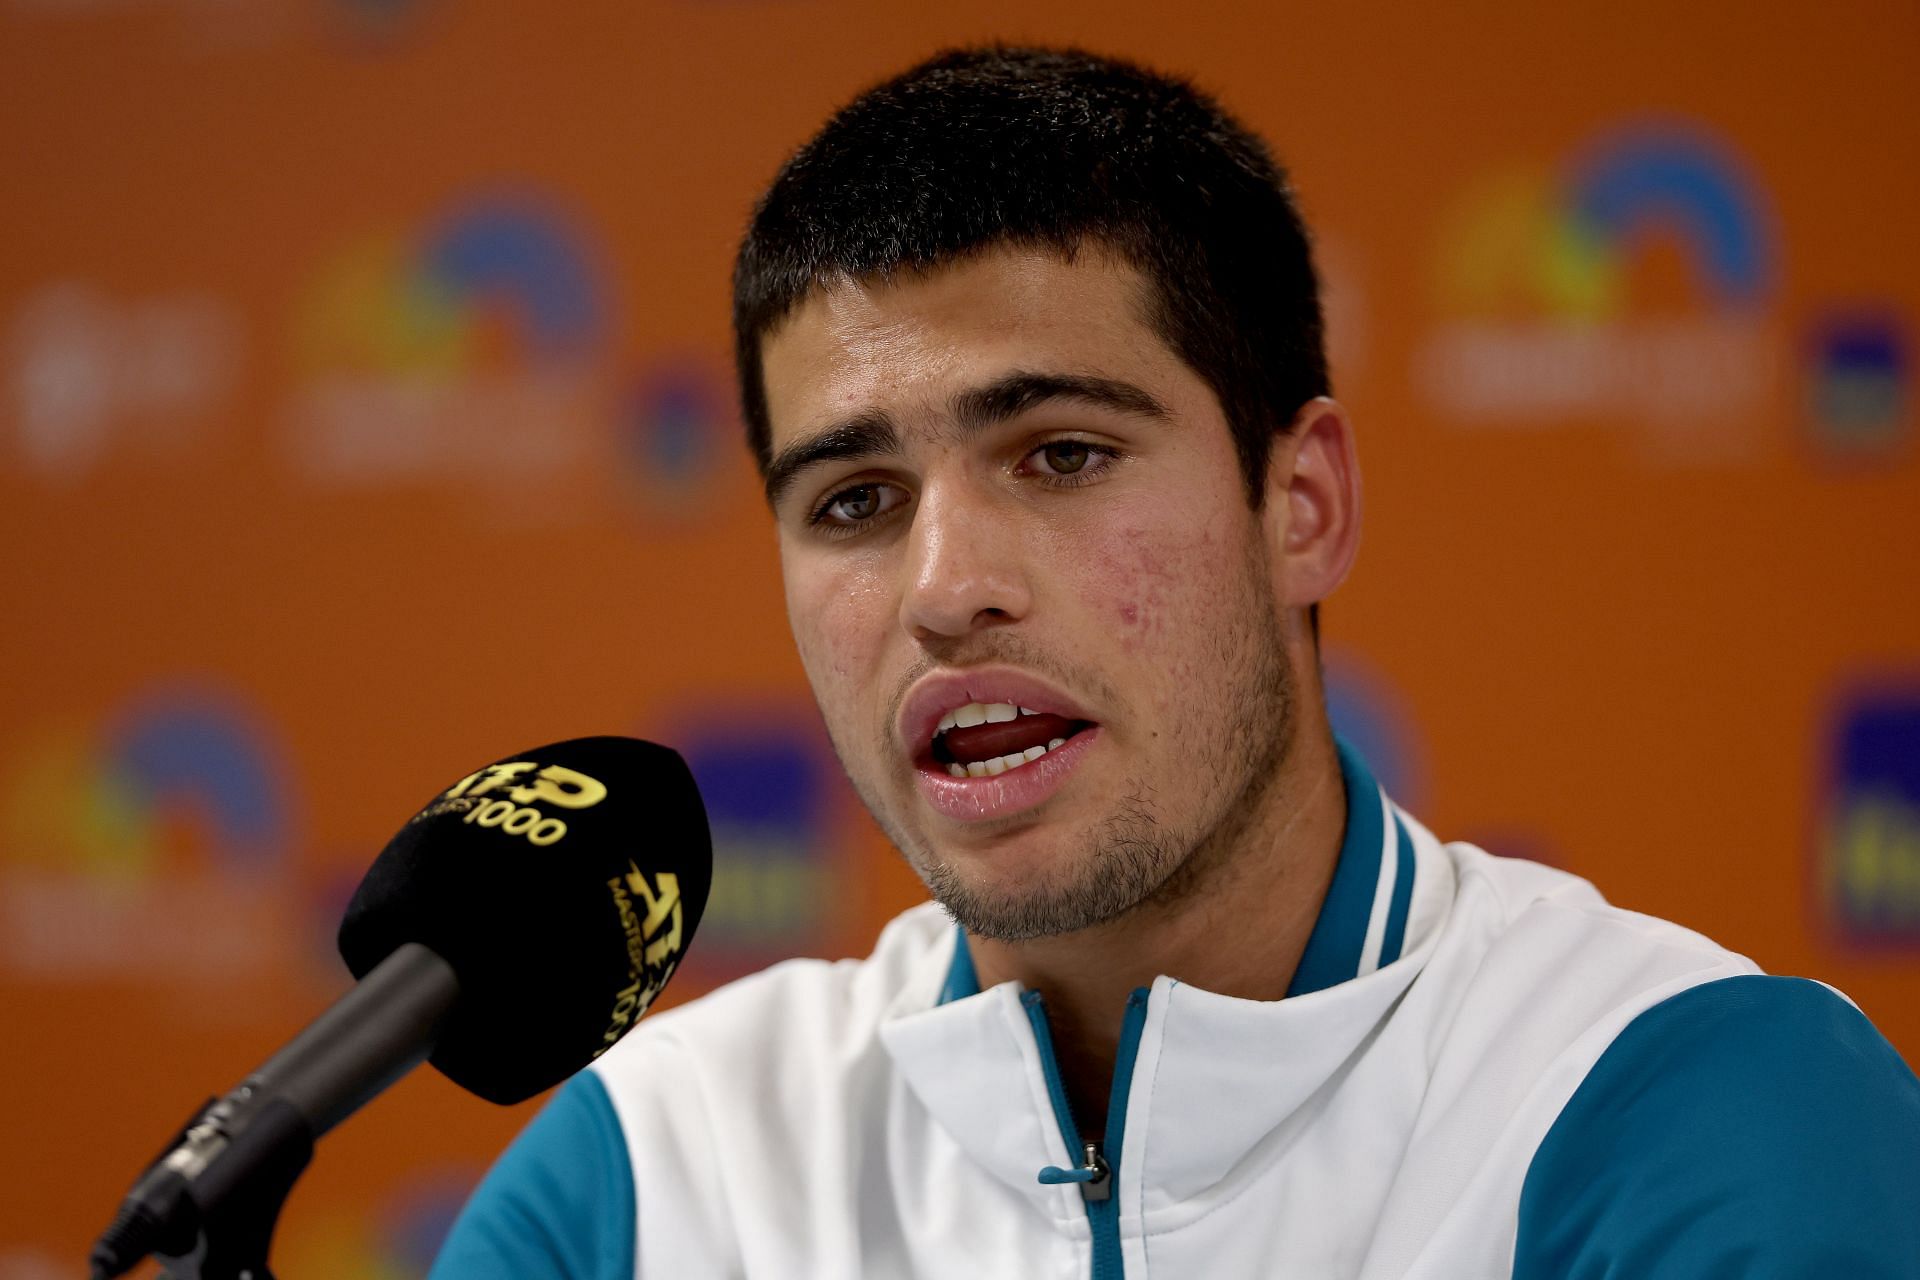 Carlos Alcaraz thinks Rafael Nadal has a great chance to win the French Open